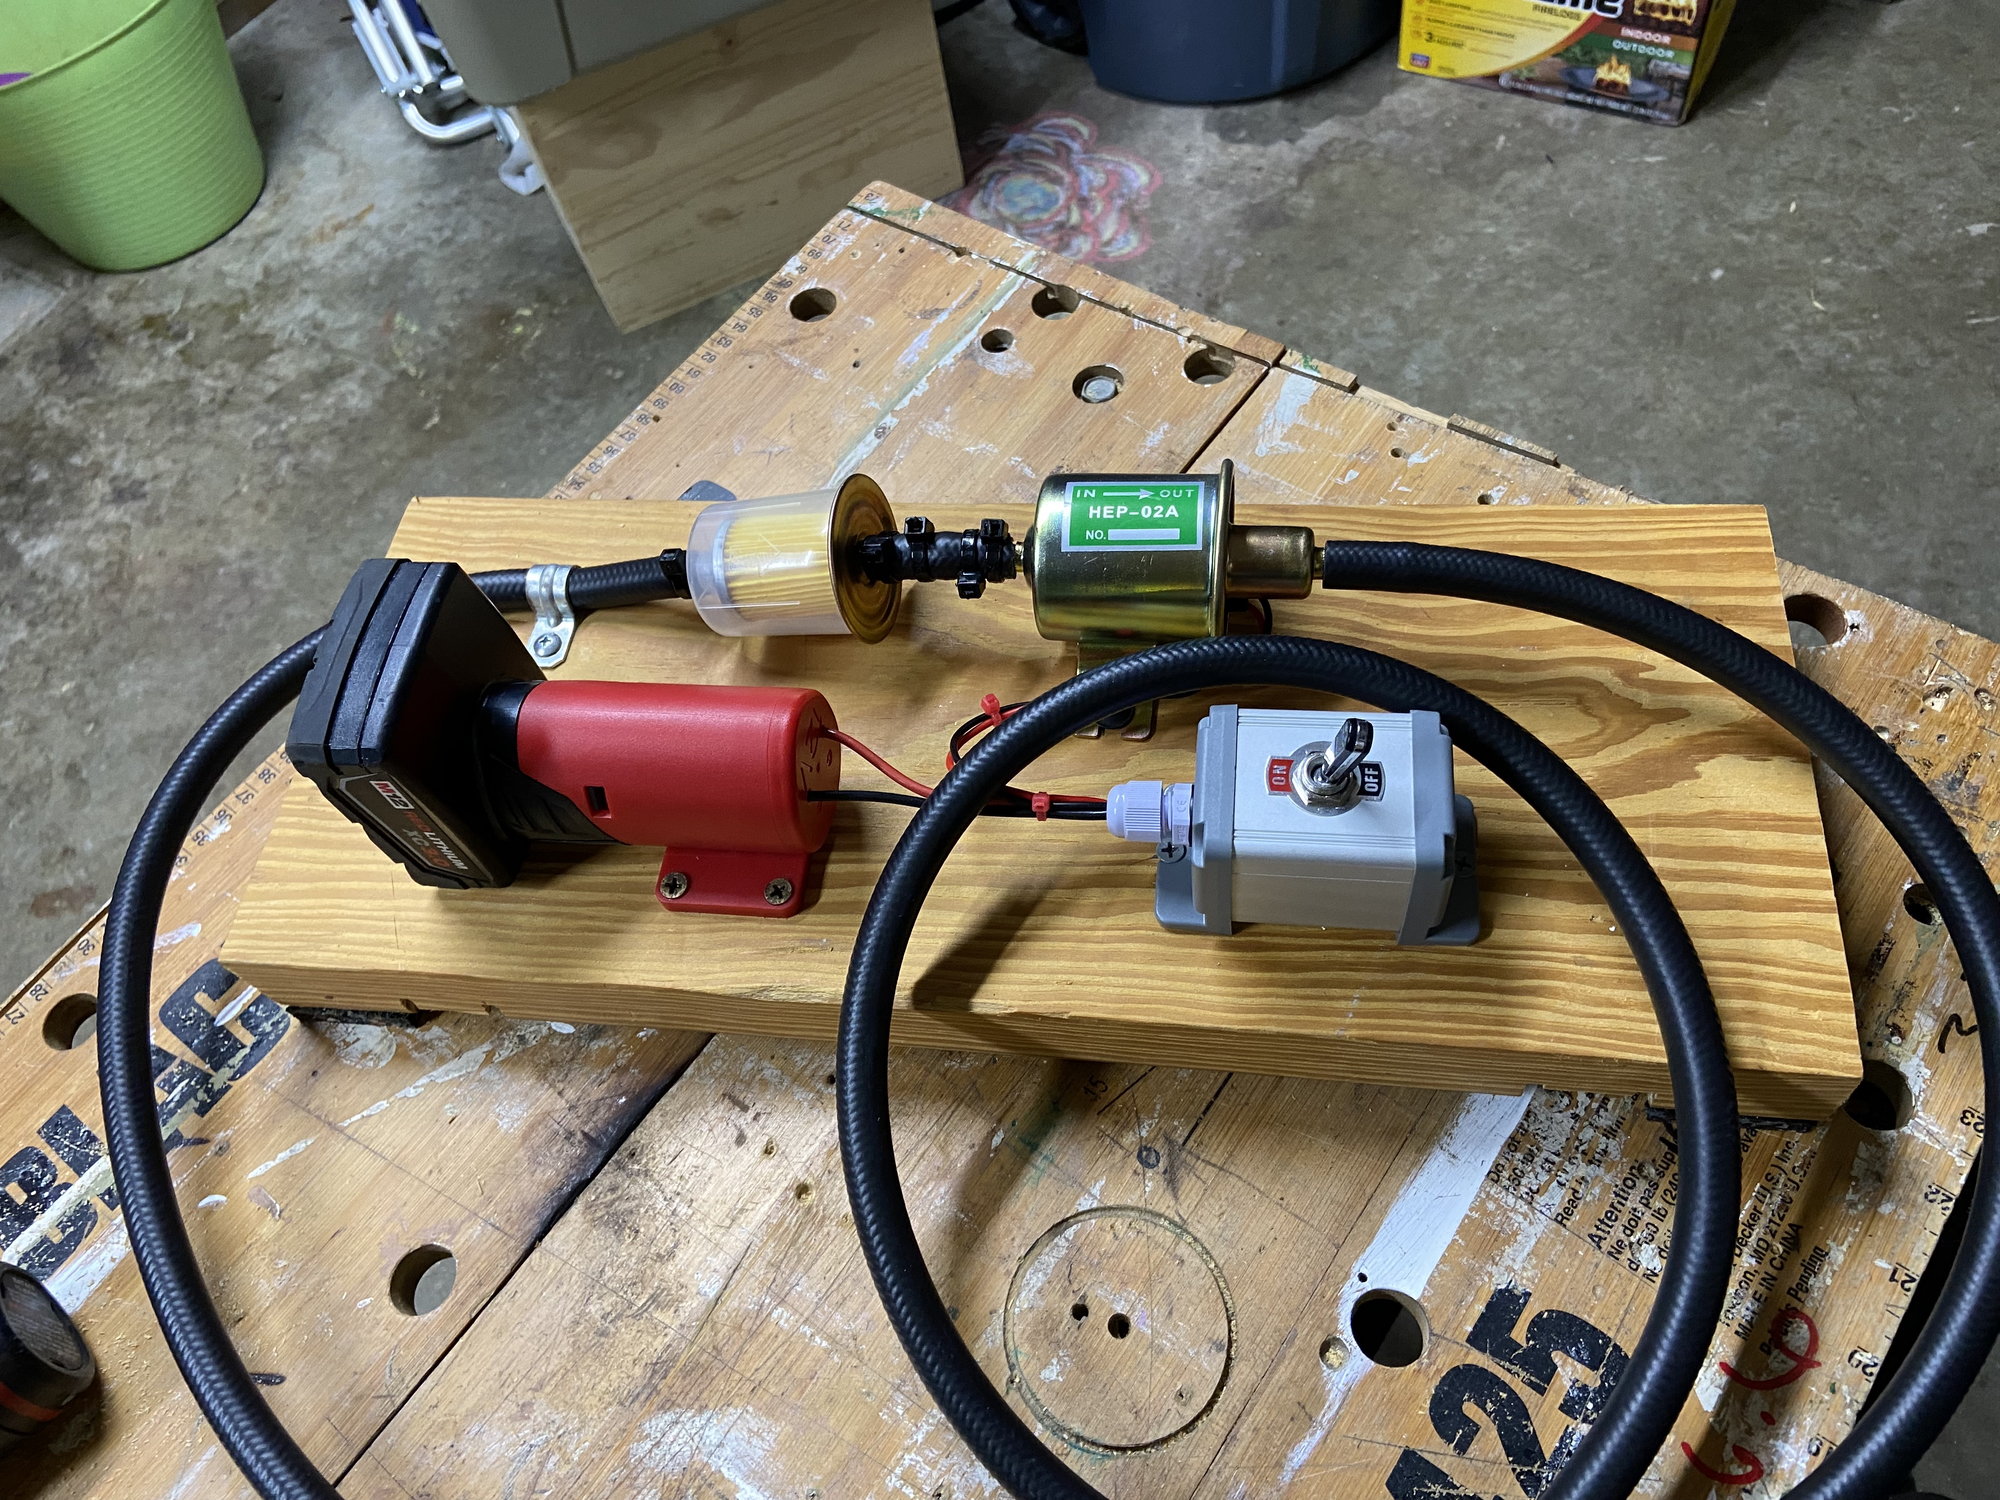 DIY fuel tank pump out kit - The Hull Truth - Boating and Fishing